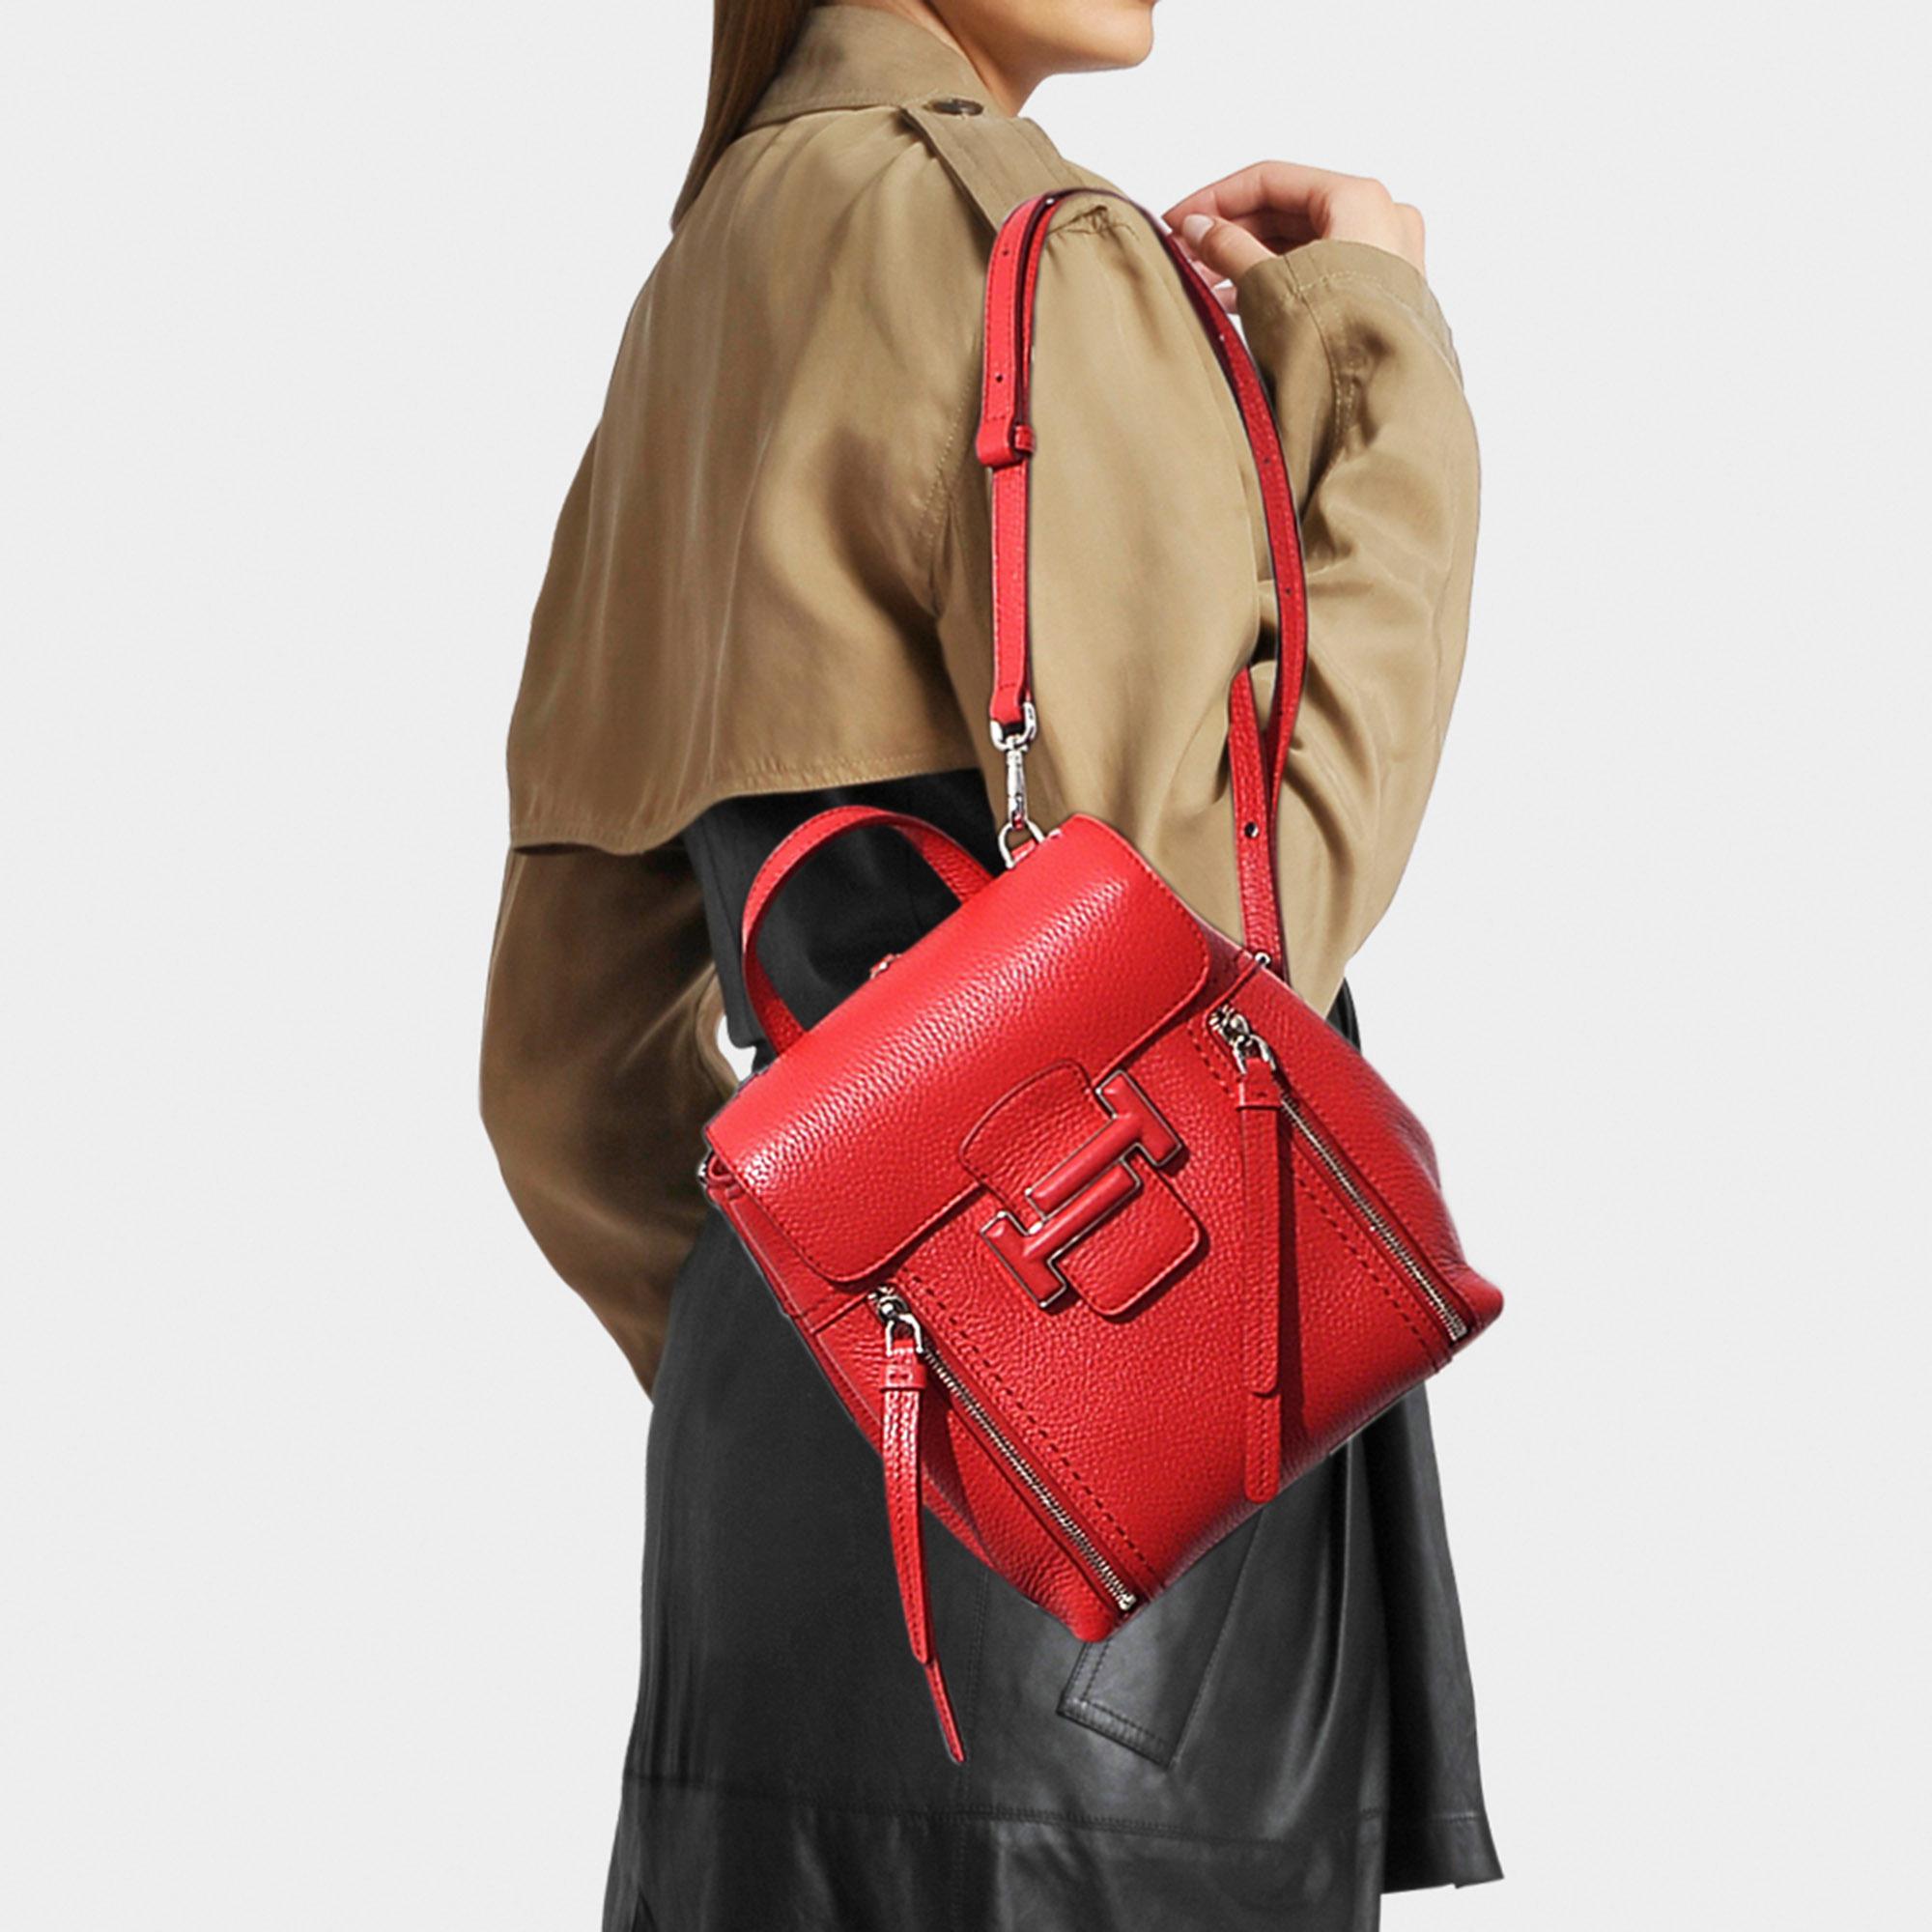 Tods Double T Bag Flash Sales, UP TO 60% OFF | www.moeembarcelona.com